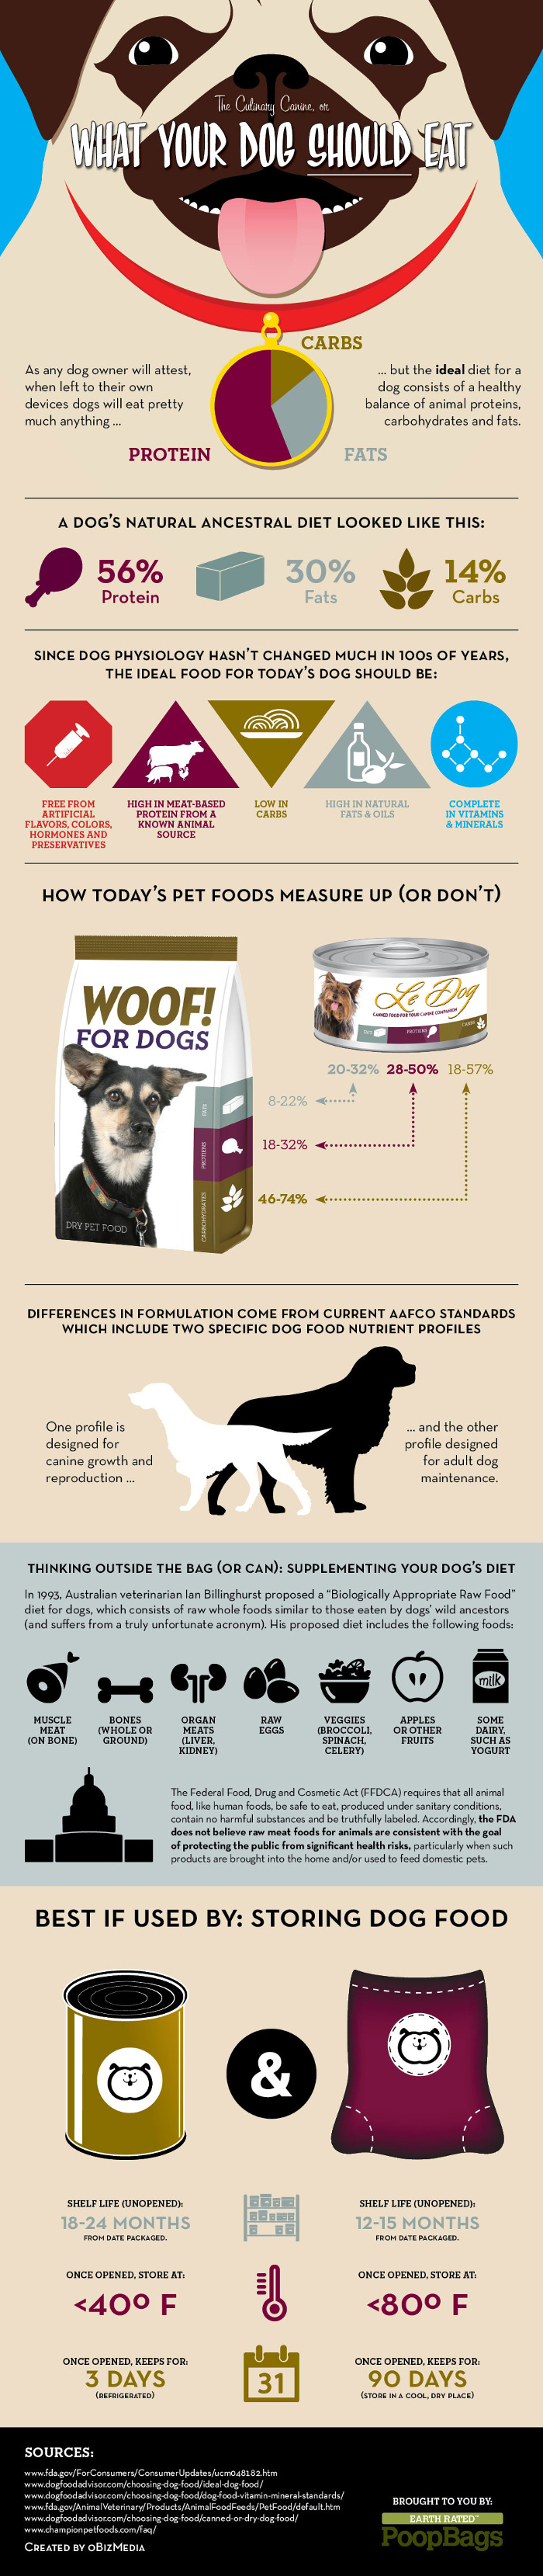 What Your Dog Should Eat